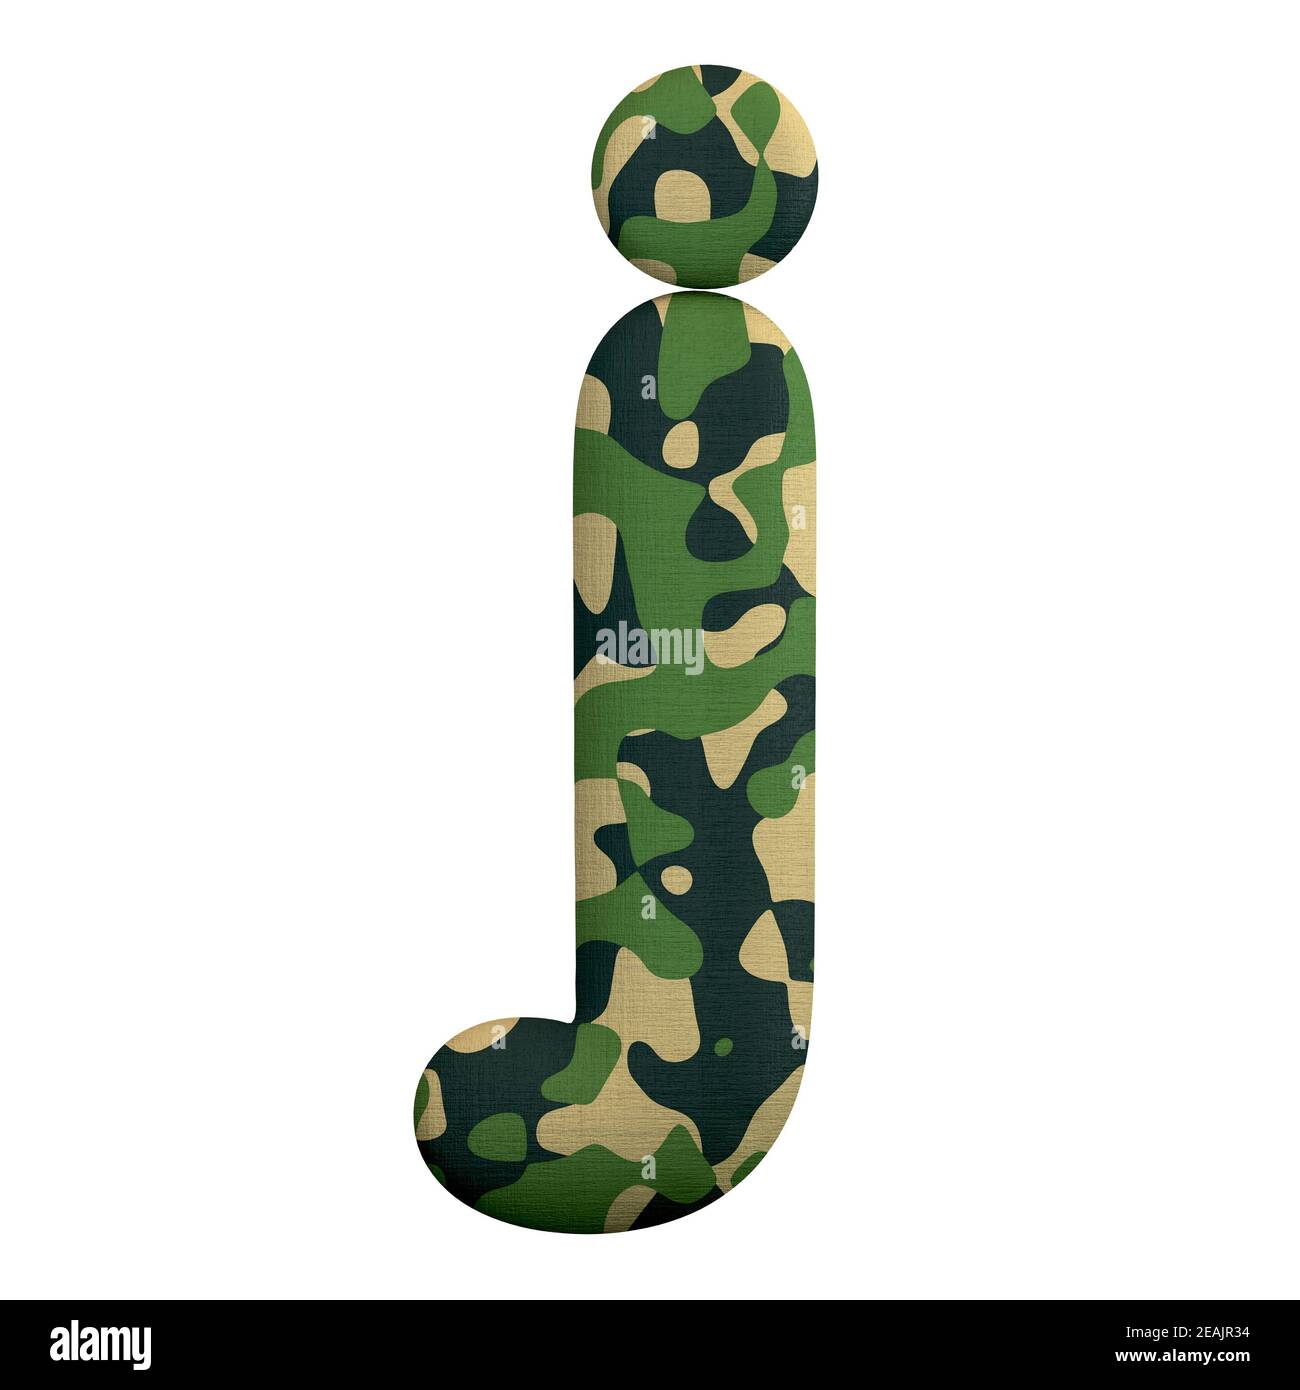 Army letter J - Lowercase 3d Camo font - Suitable for Army, war or survivalism related subjects Stock Photo